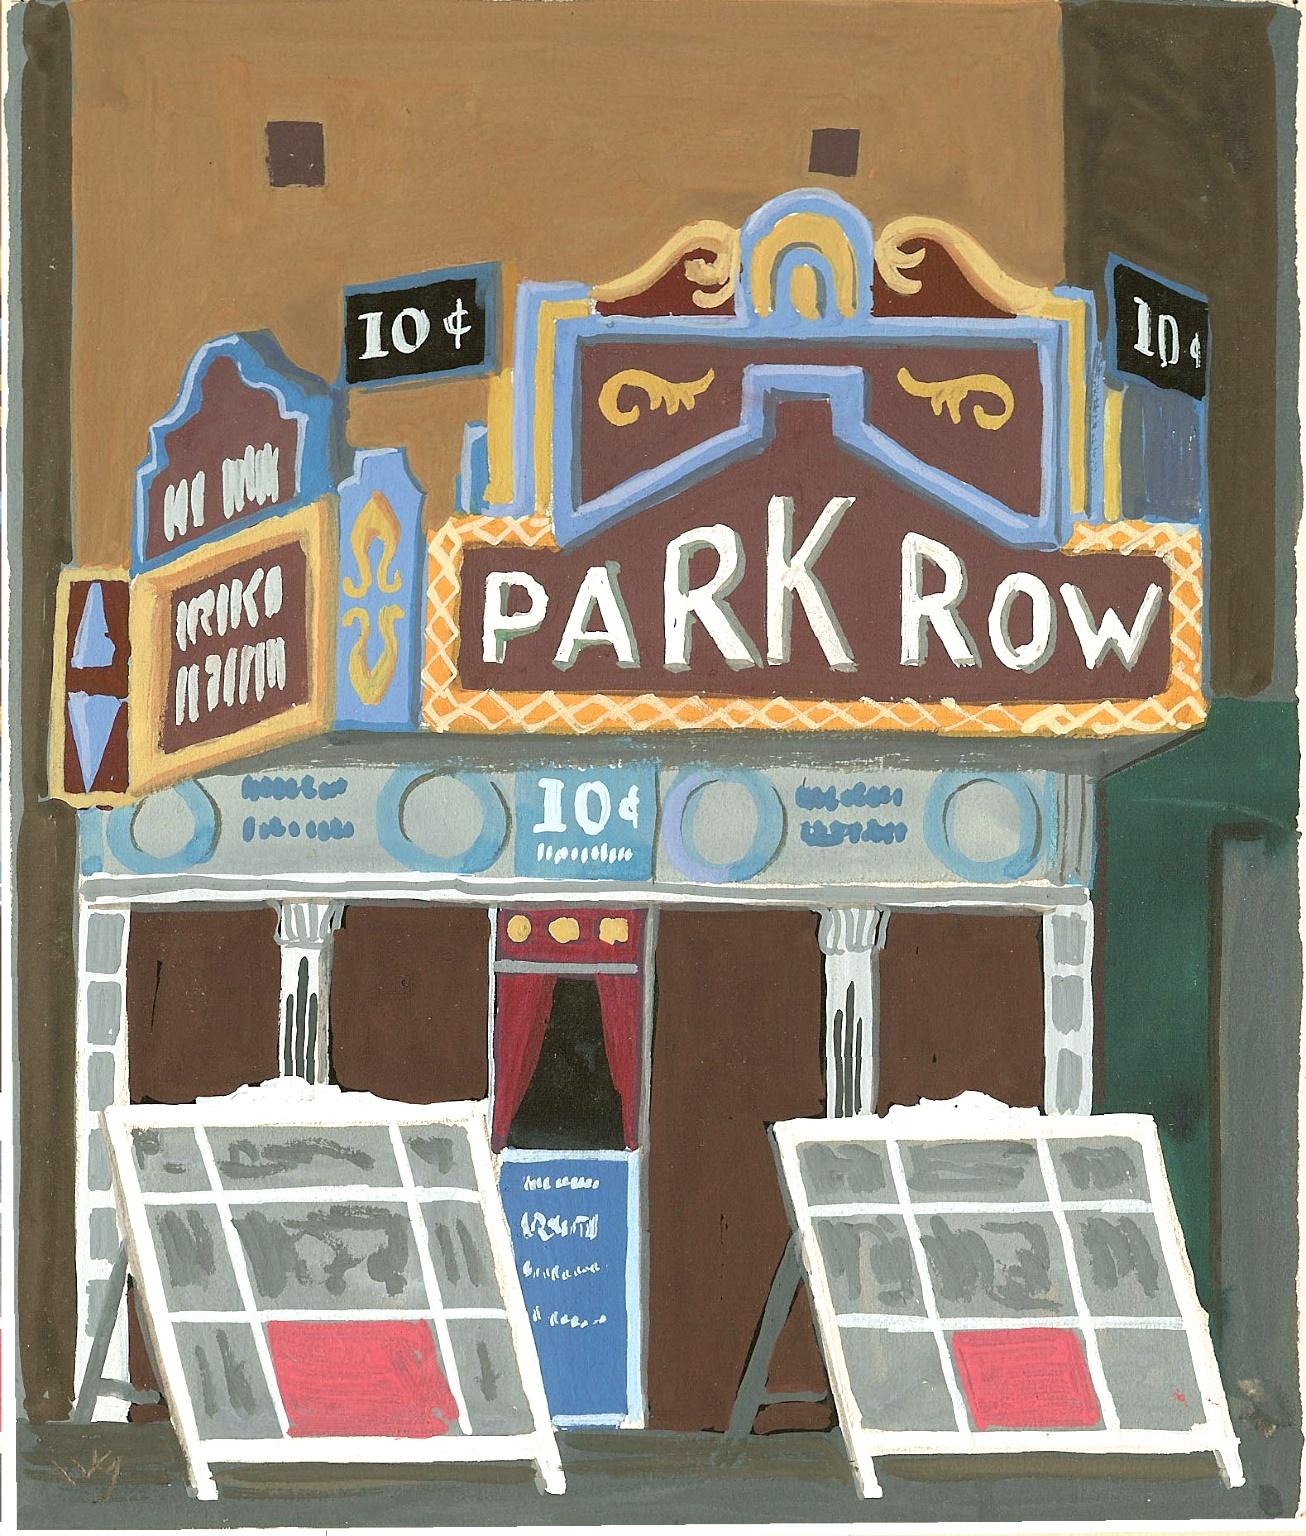 This gouache by Witold Gordon, is one of a series commissioned by Conde Nast which were published in Vanity Fair magazine in July 1934 under the banner “New York Shops You Never See”. Framed to 9